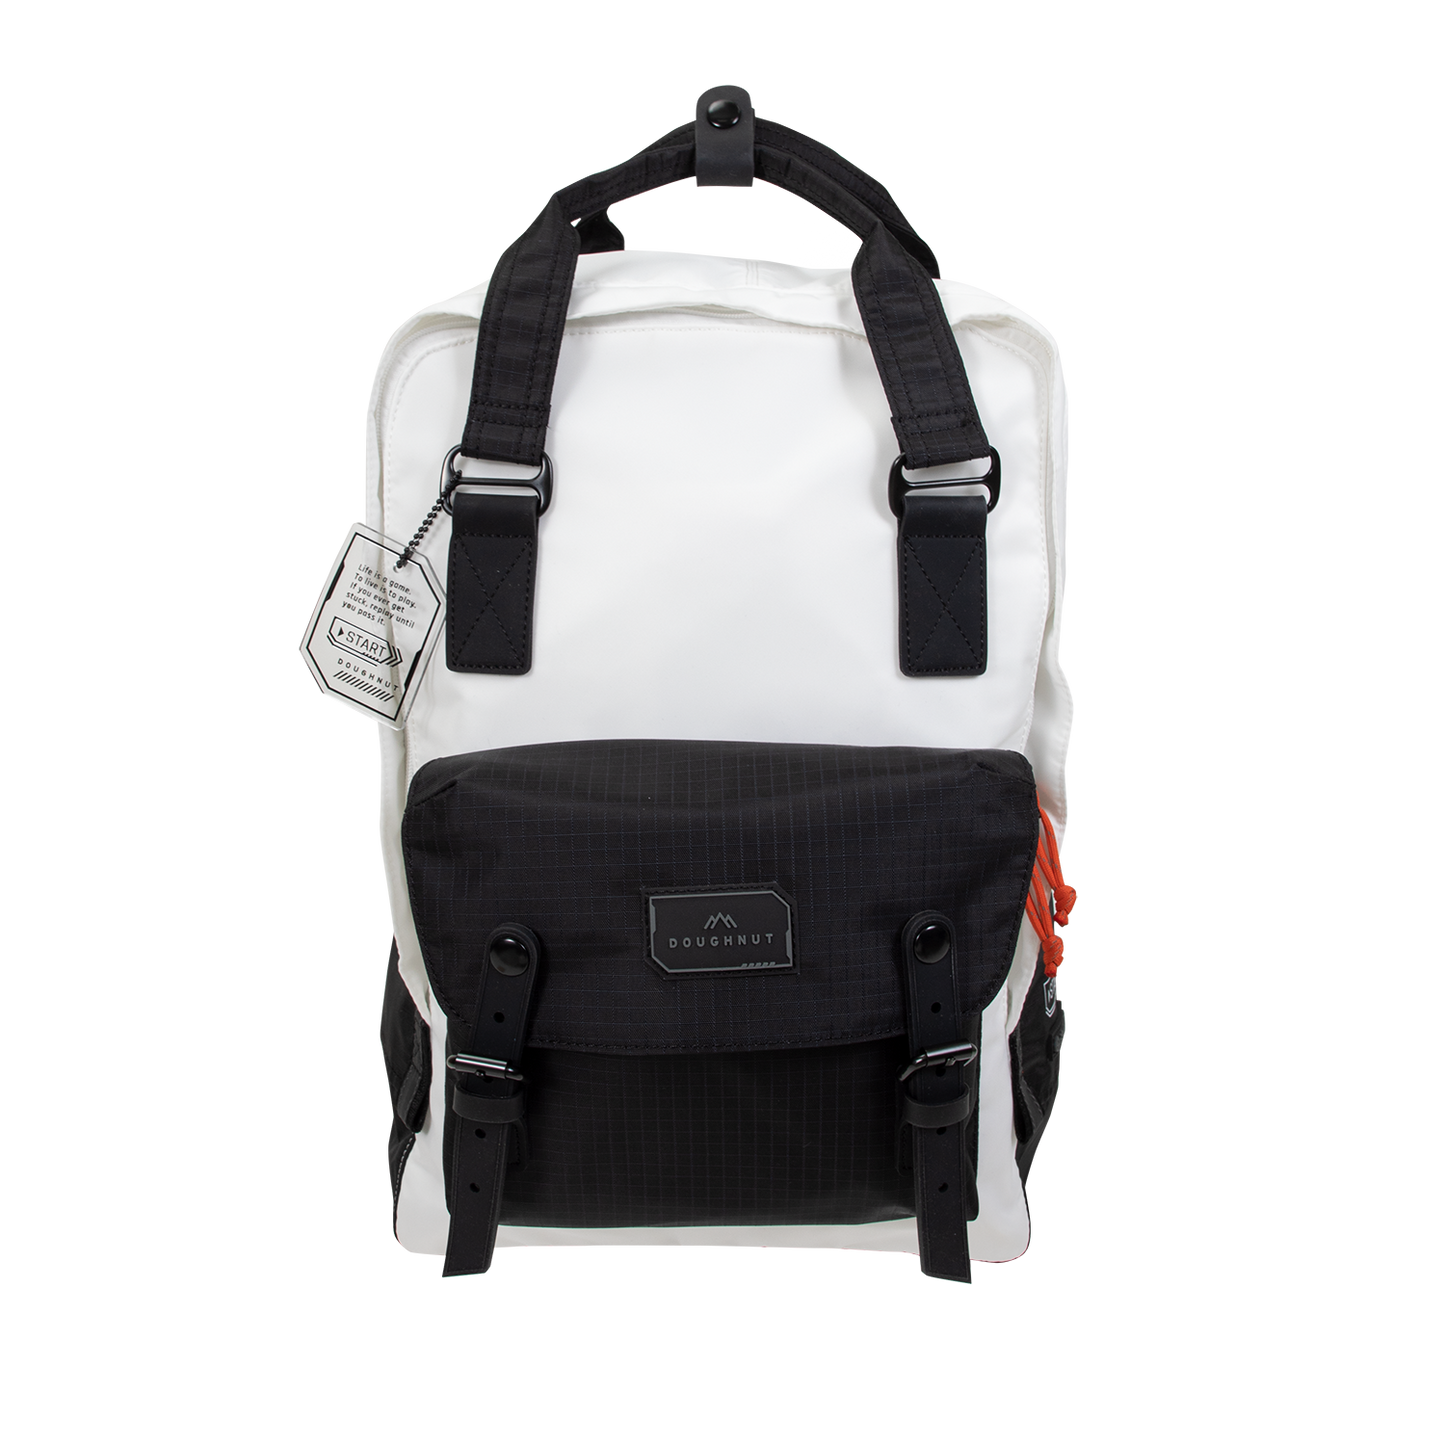 Macaroon Large Gamescape Series Backpack